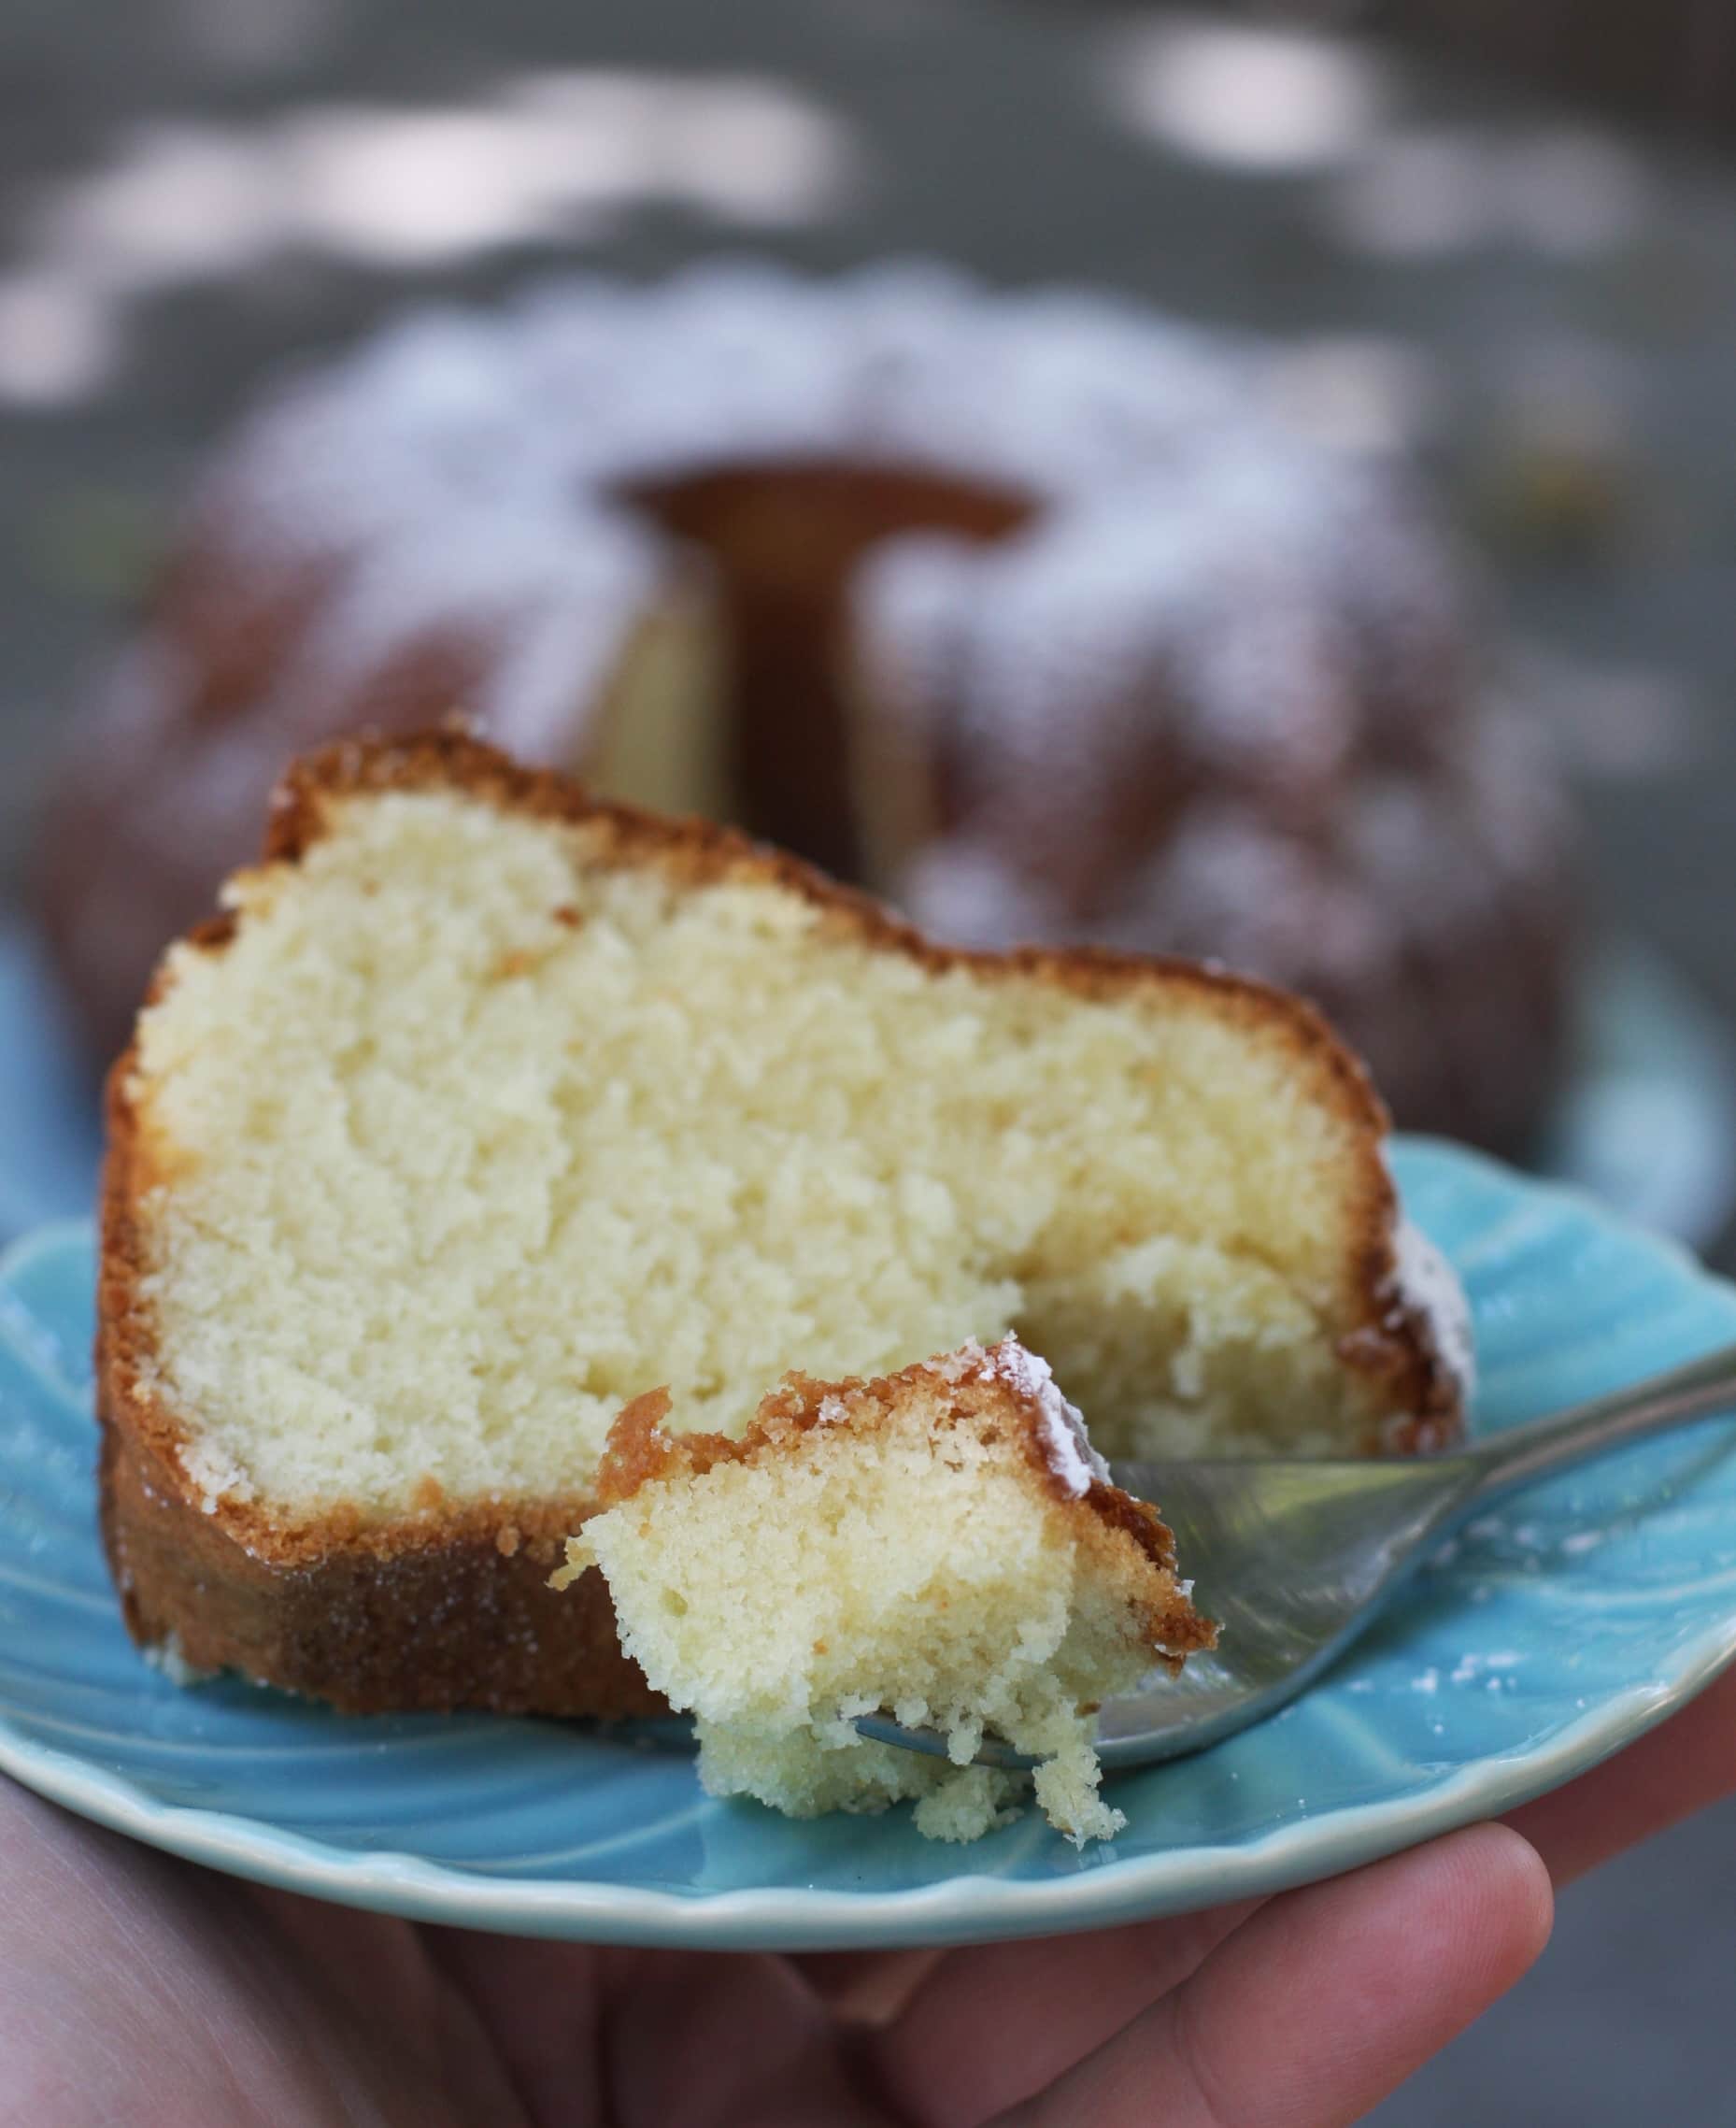 How To Make Classic Sour Cream Pound Cake from Scratch